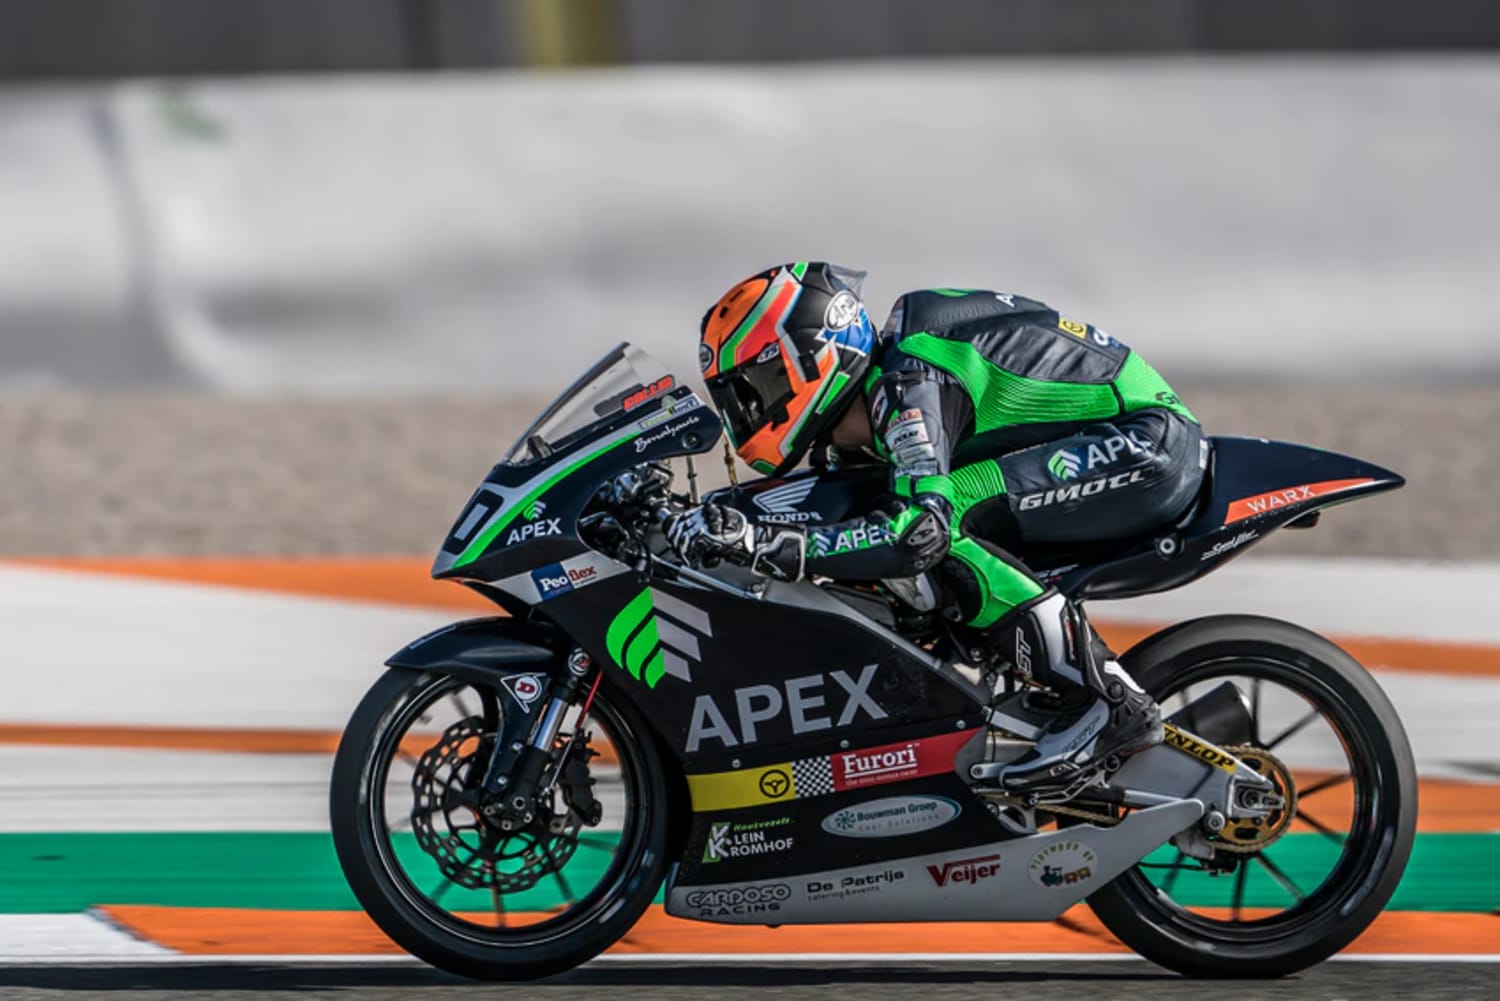 Blog | Collin Veijer with a good ETC Valencia weekend